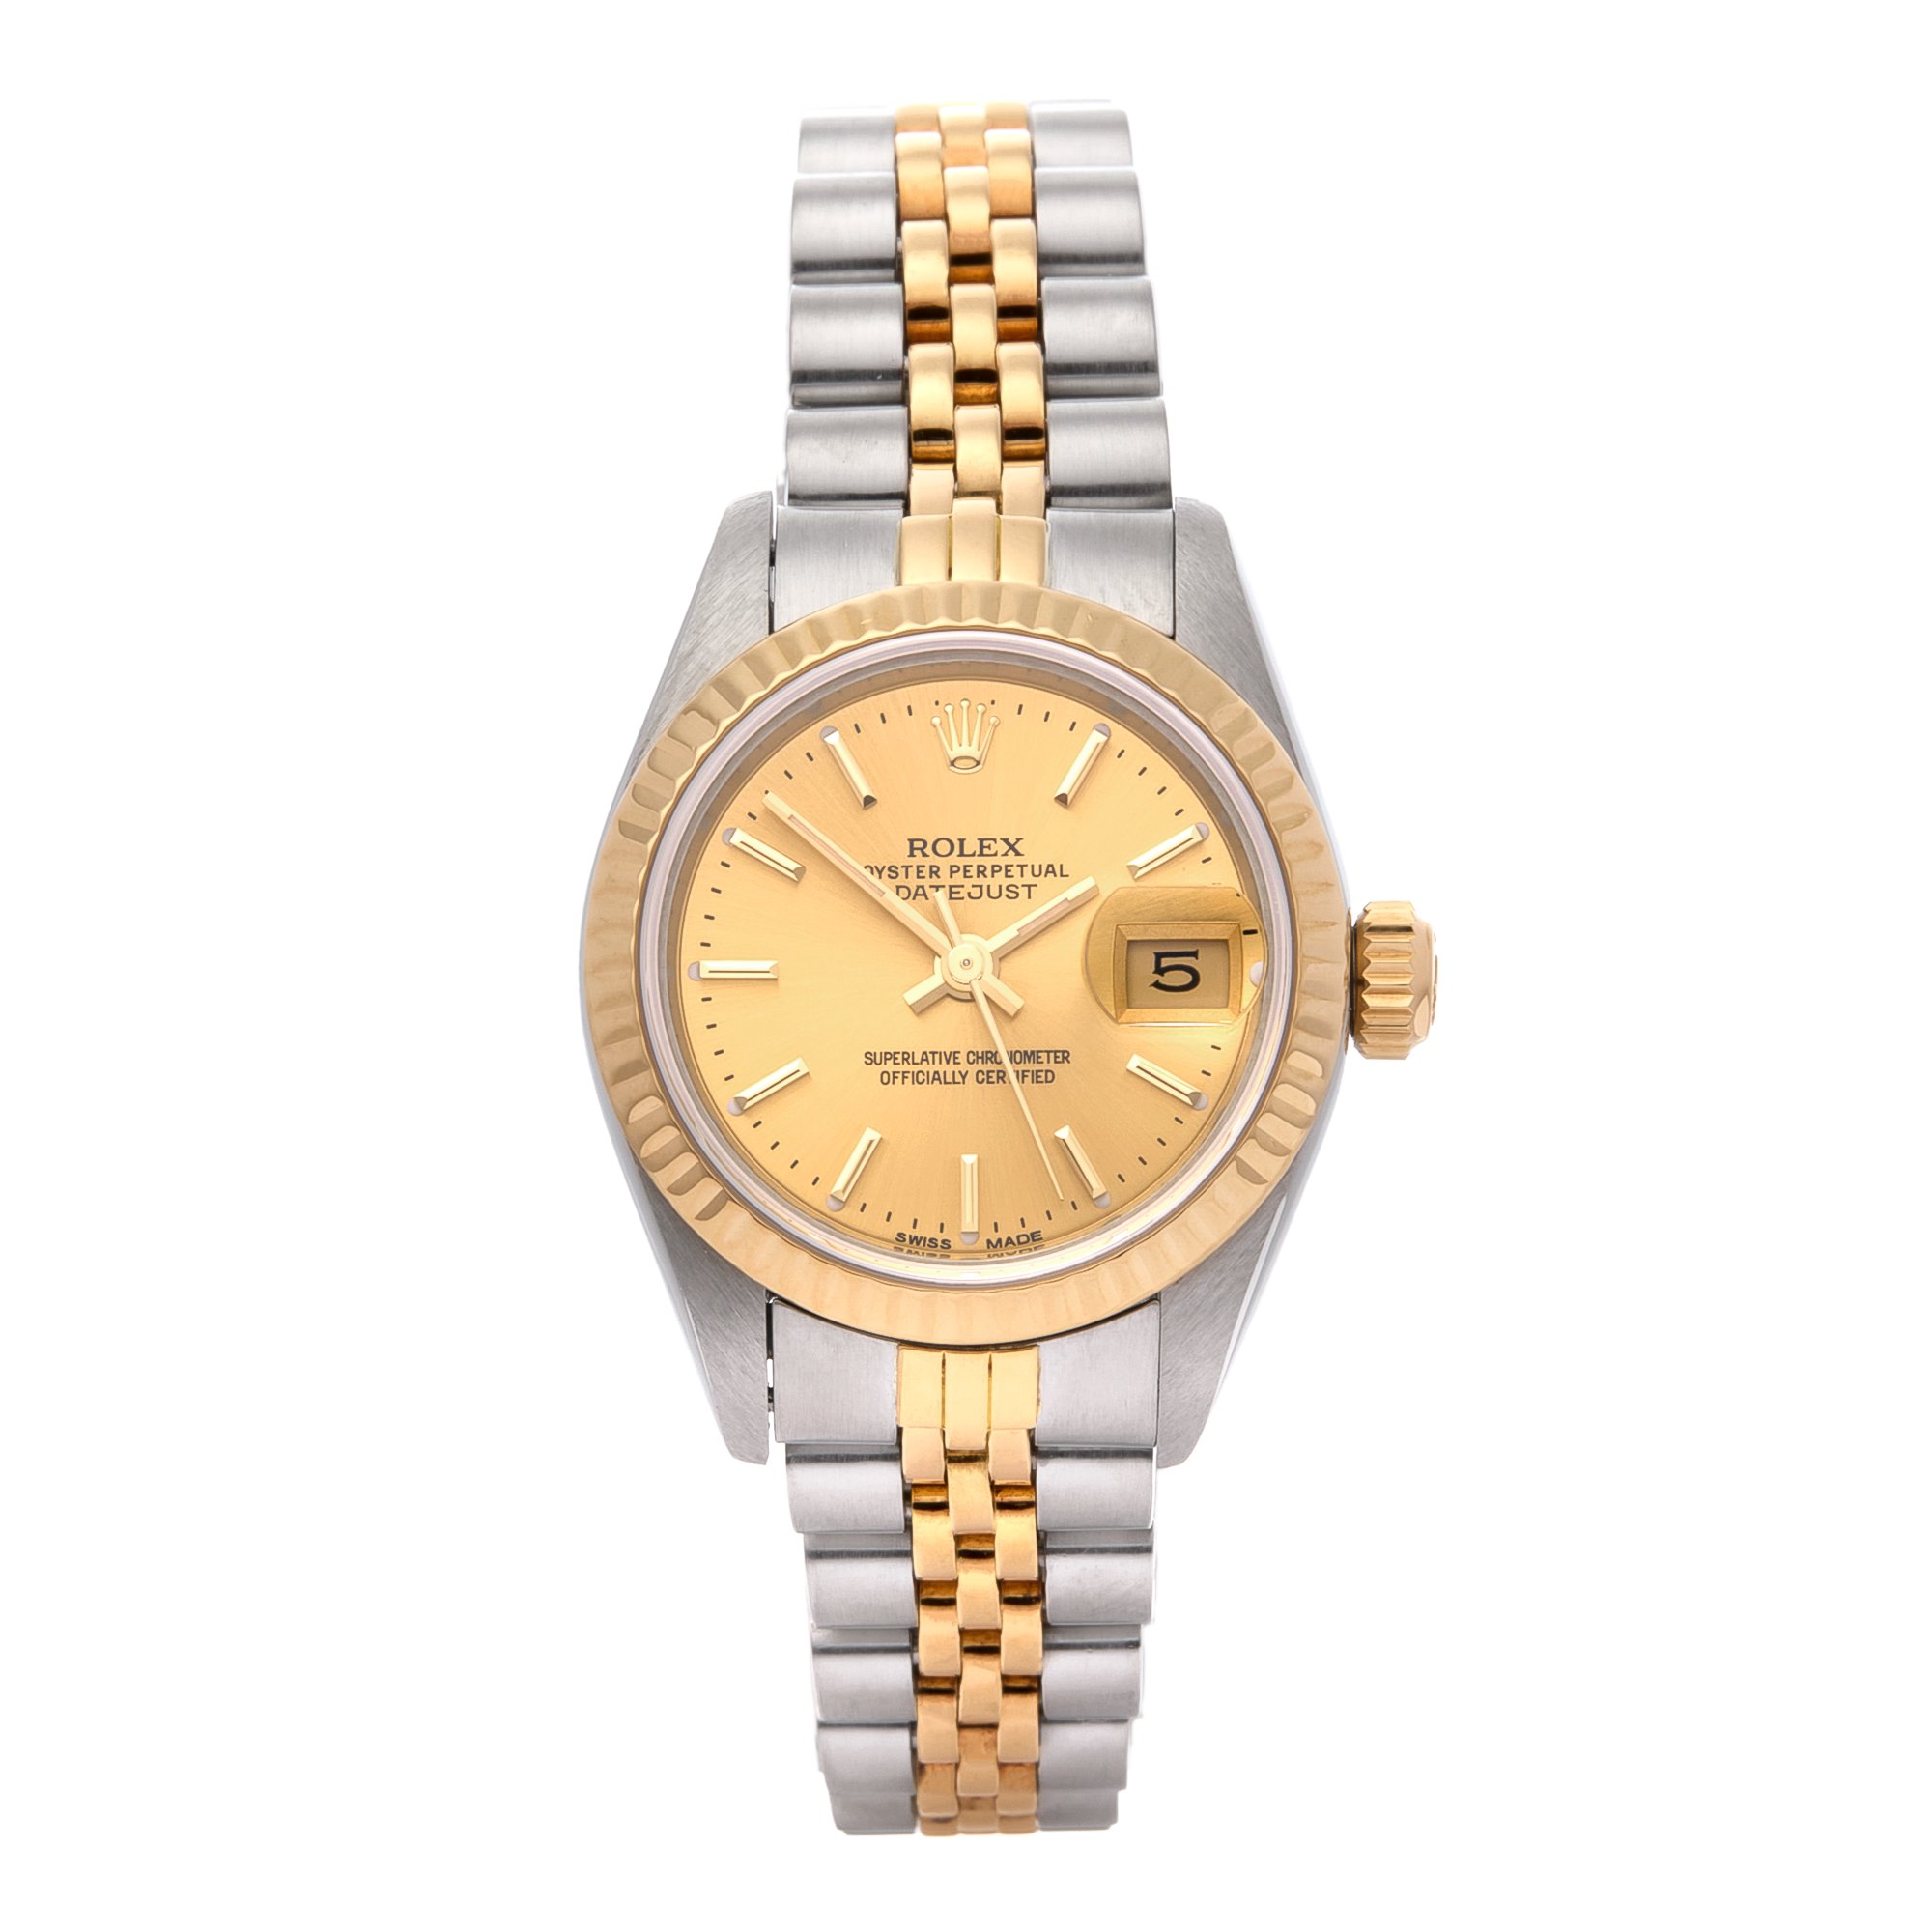 Rolex Datejust 26 Yellow Gold & Stainless Steel 69173